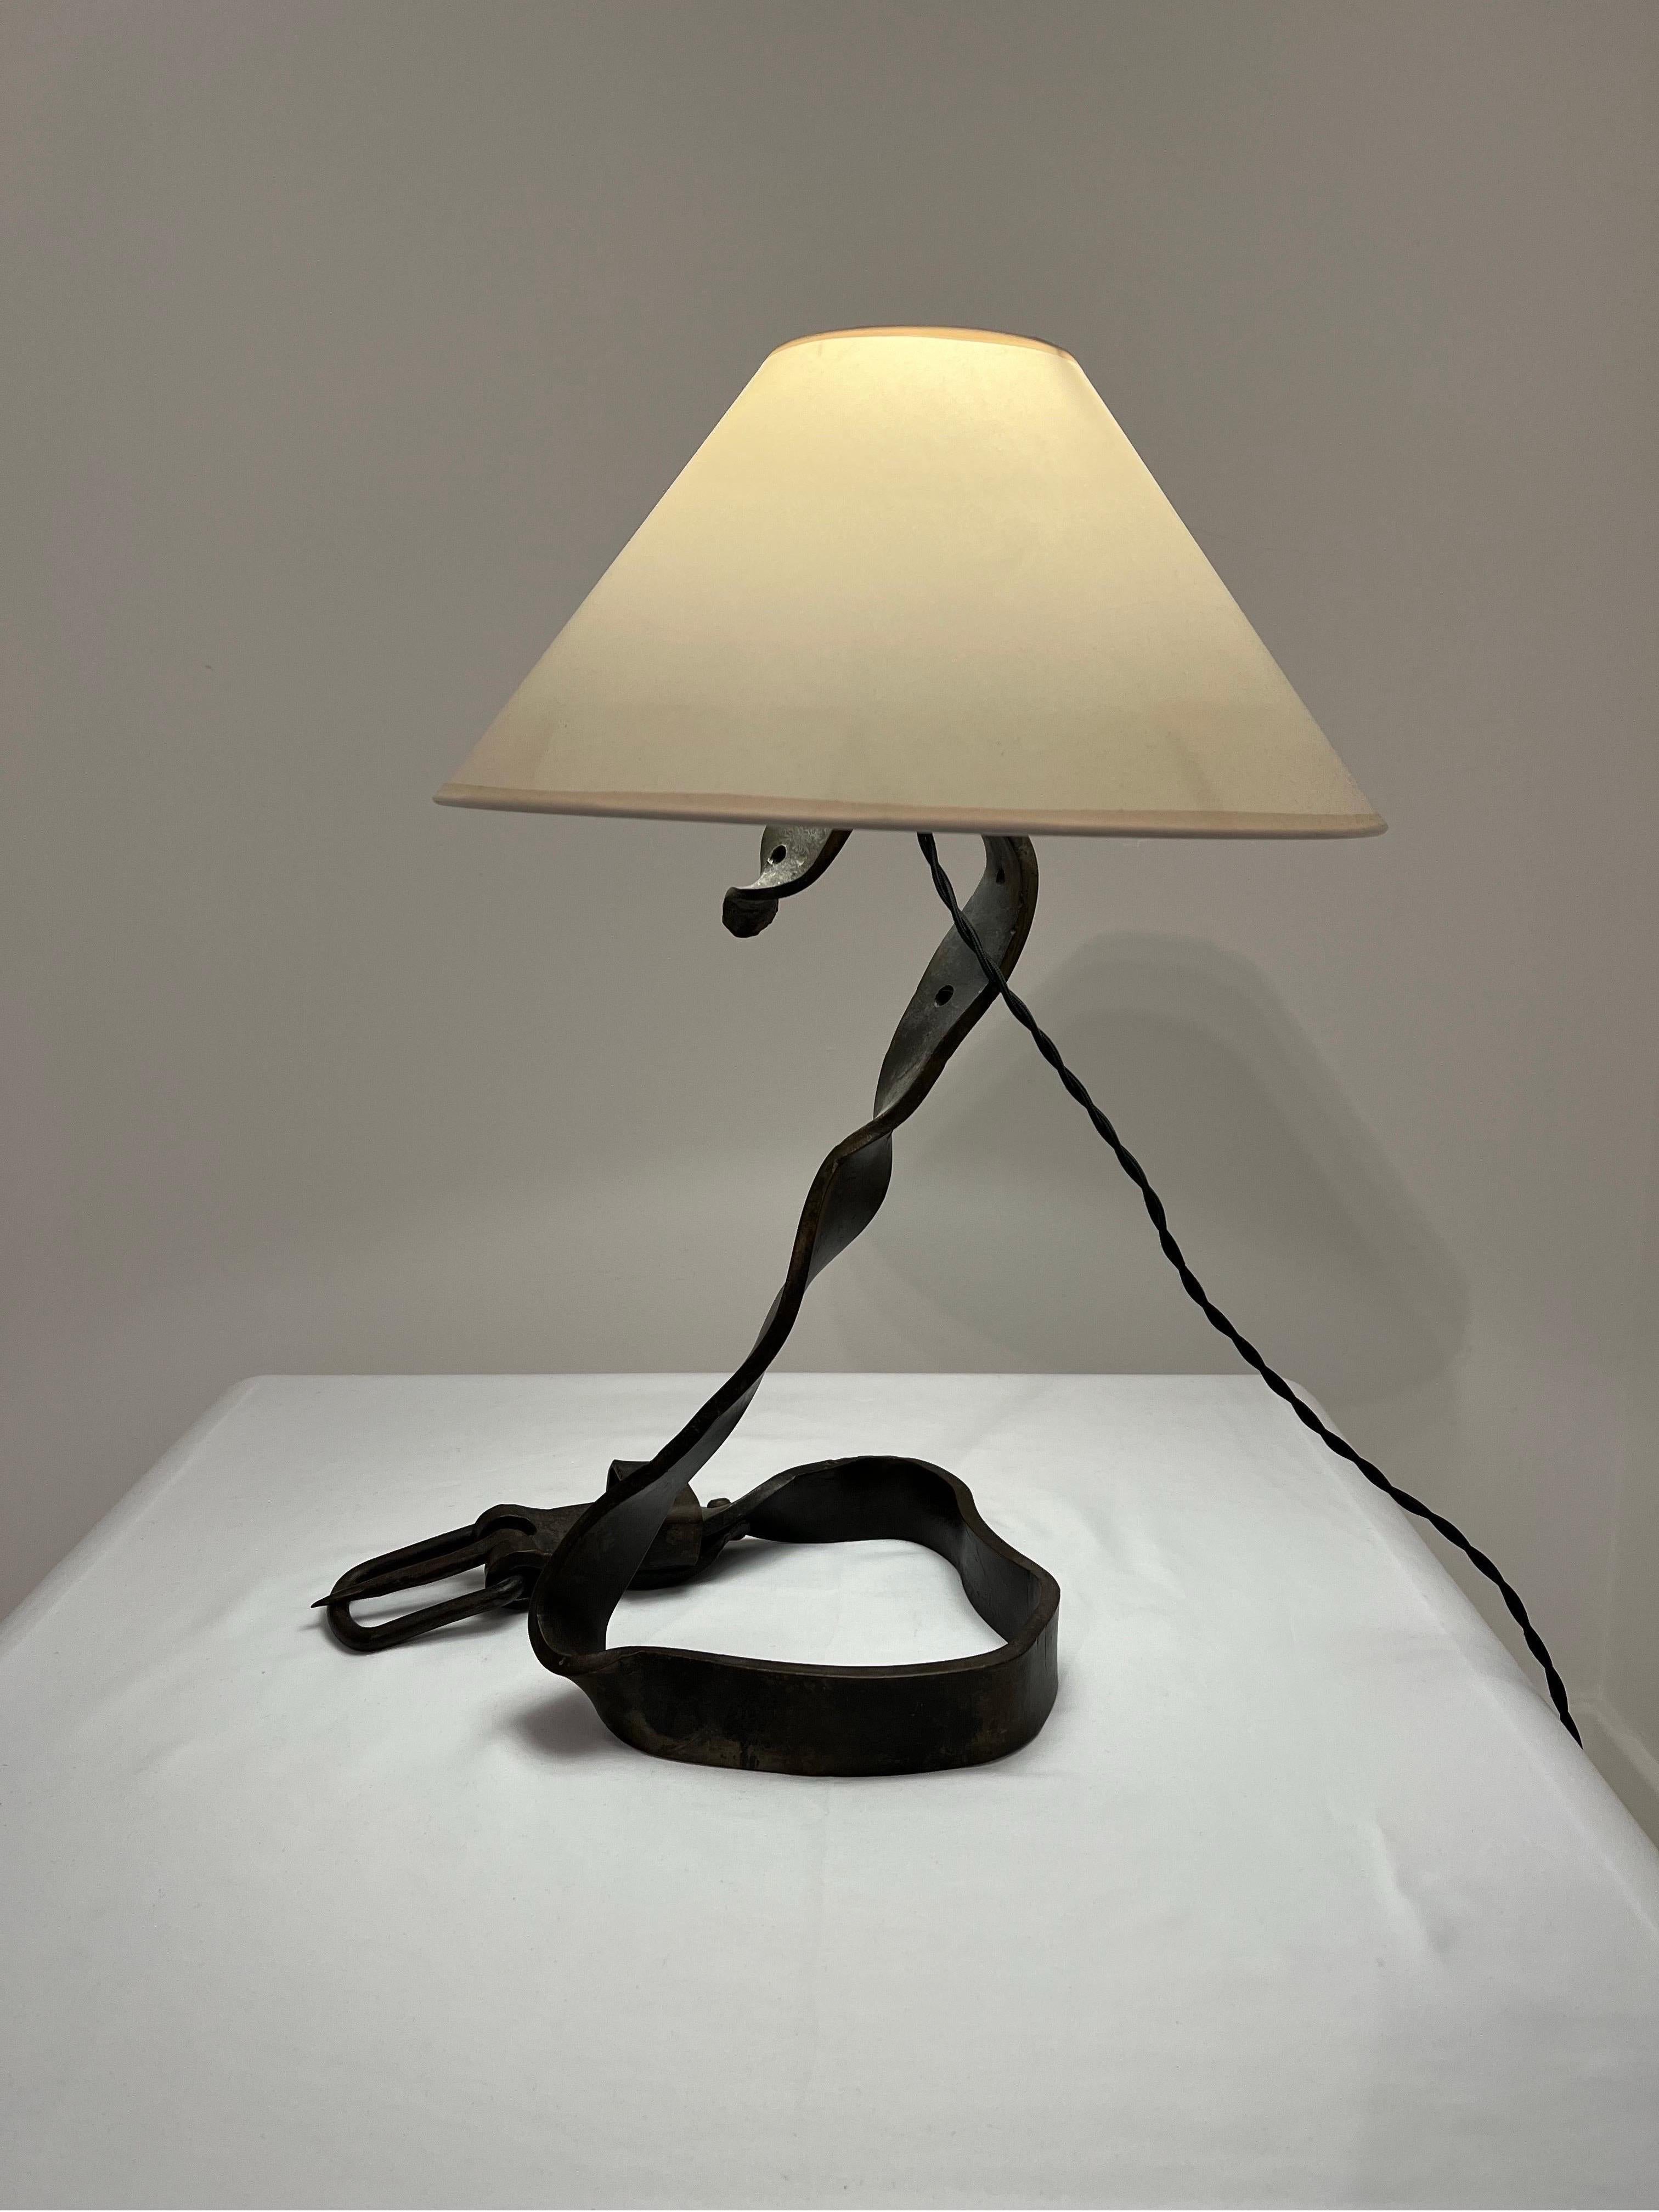 Beautiful French Iron Belt Lamp.
Incredible detail with moving buckle design. 
Initialled W J to identify. 
